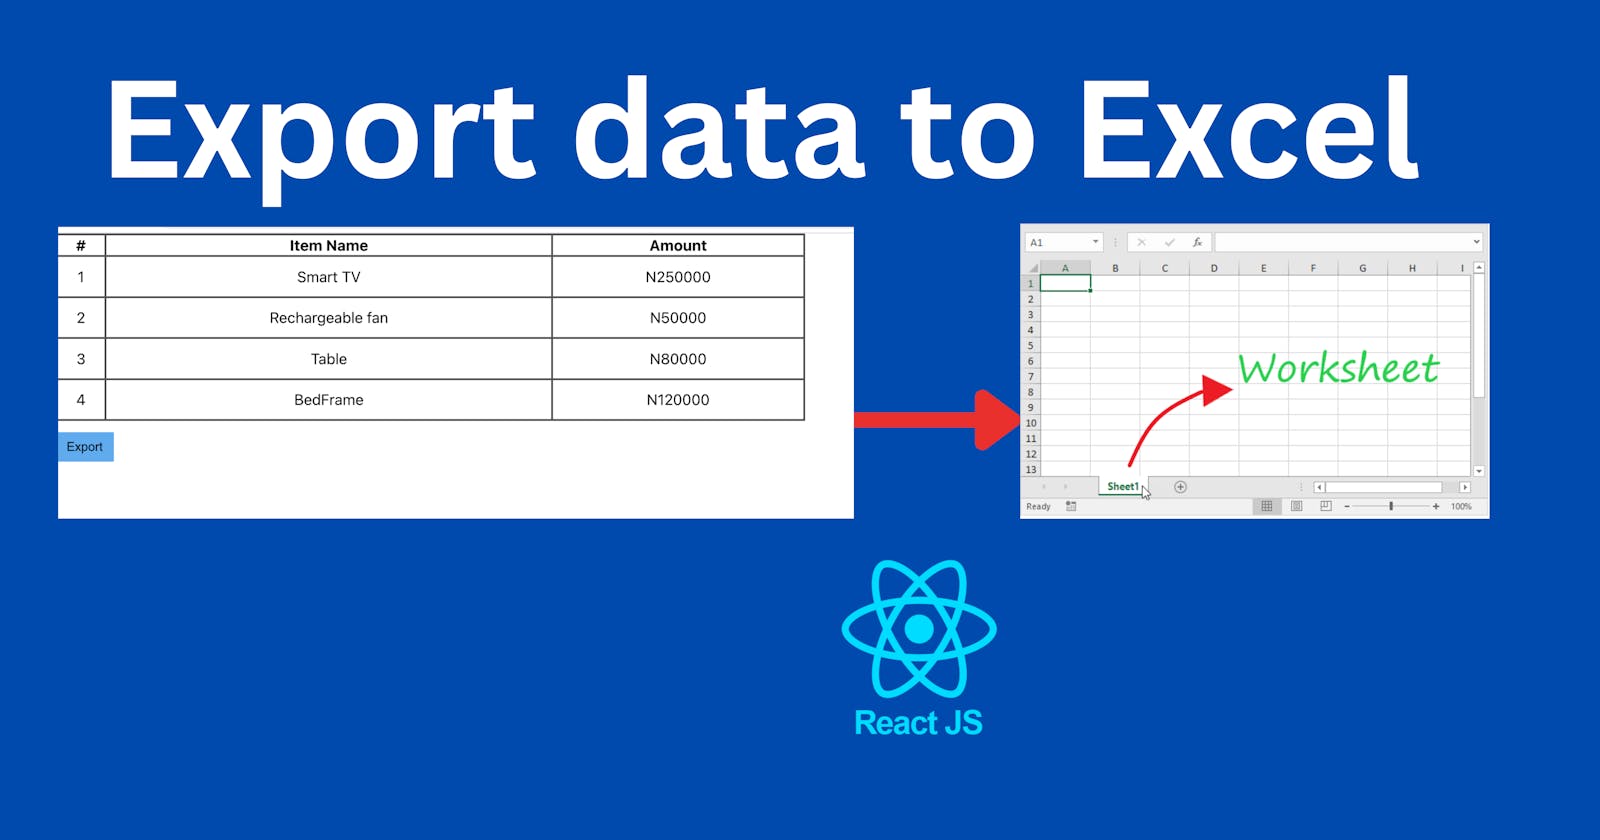 Making Data Exports Easier with SheetJS and React JS